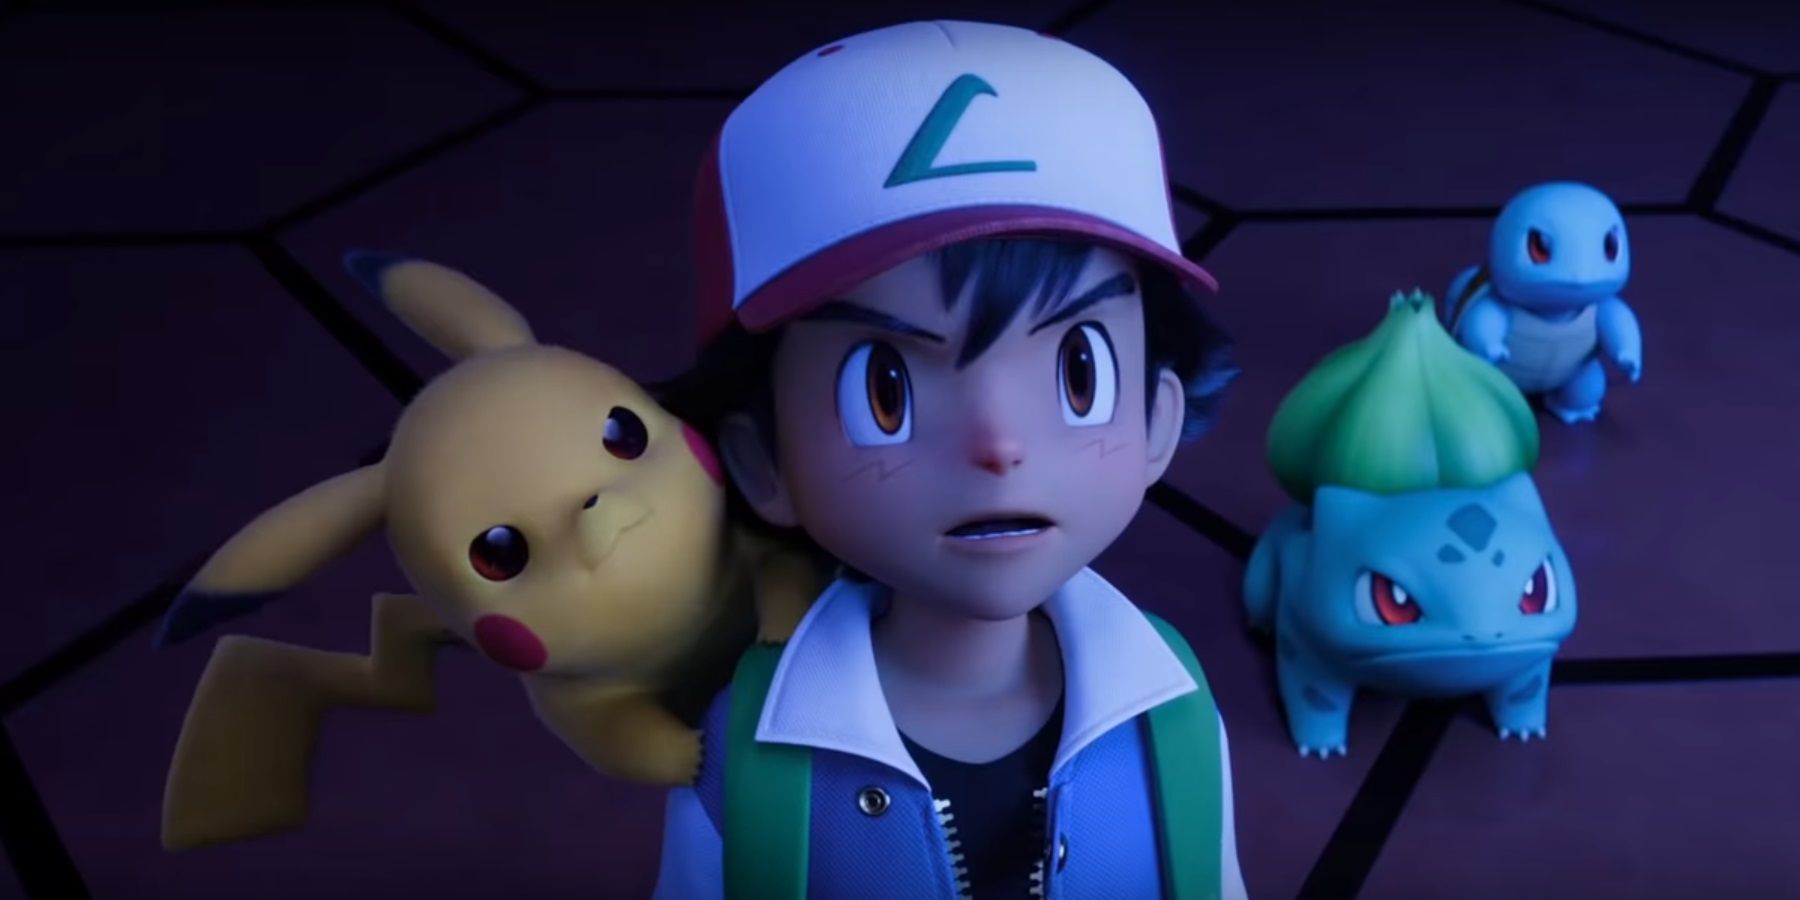 Ash Ketchum and Pikachu look in Mewtwo Strikes Back - Evolution coming to Netflix